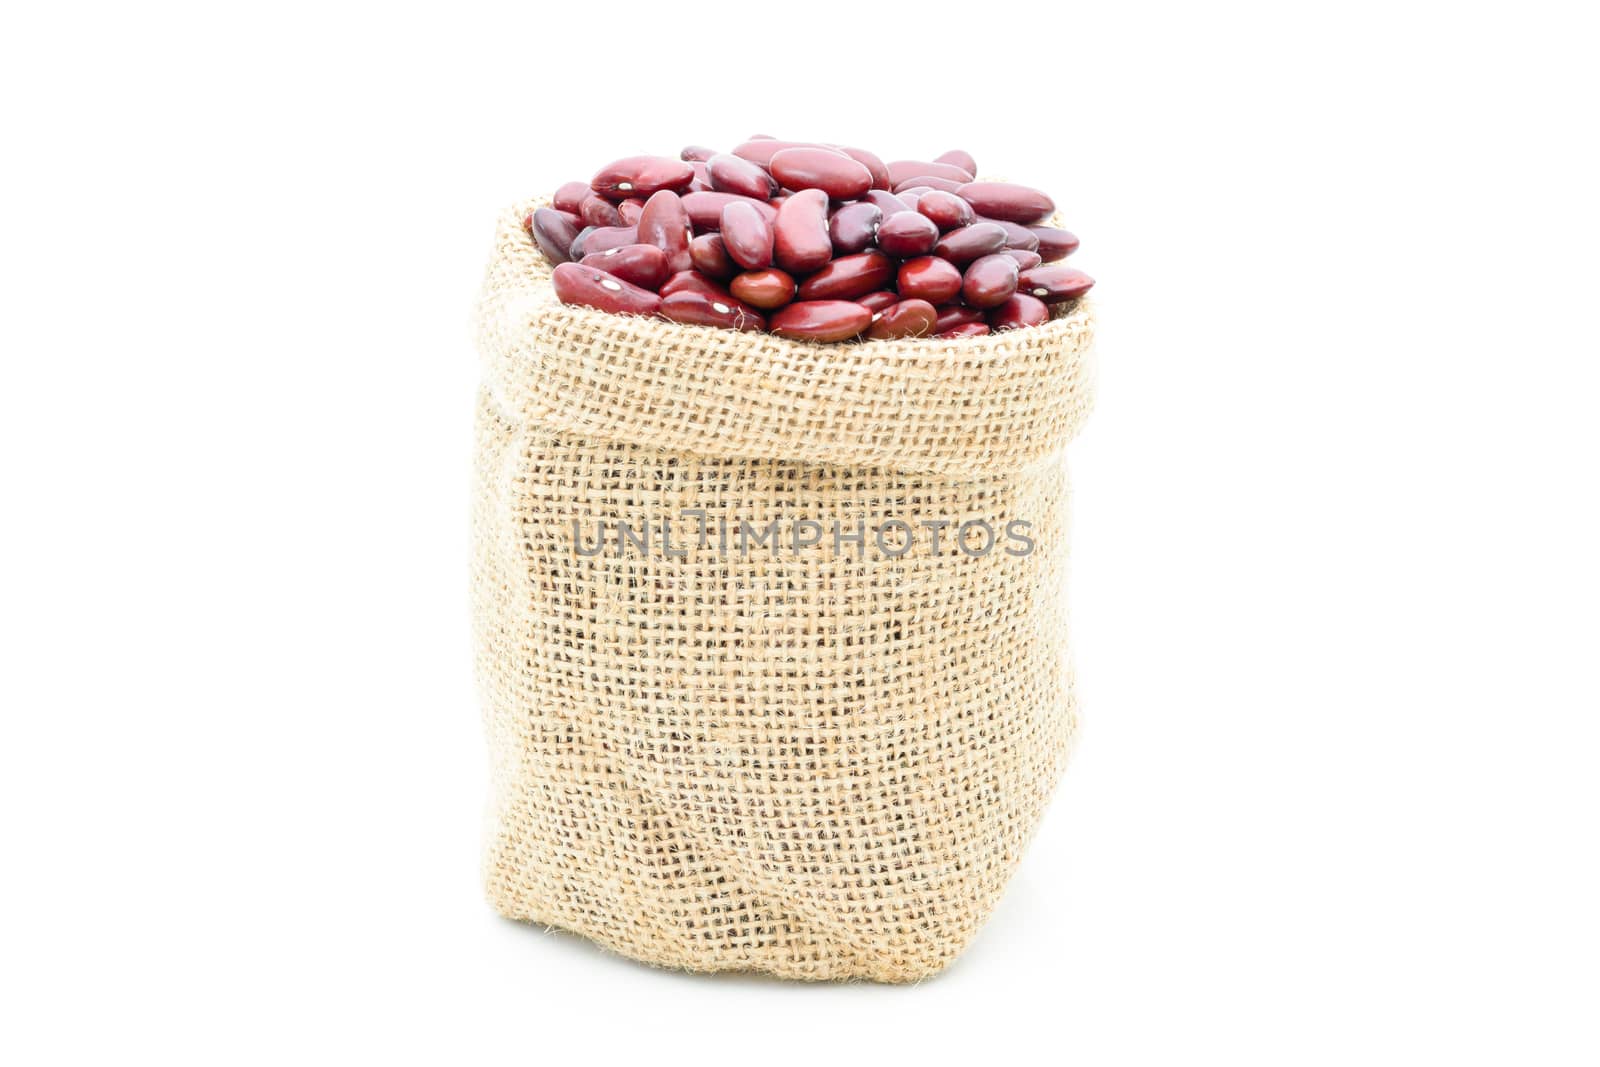 Grains Red beans in a sack on a white background by sompongtom